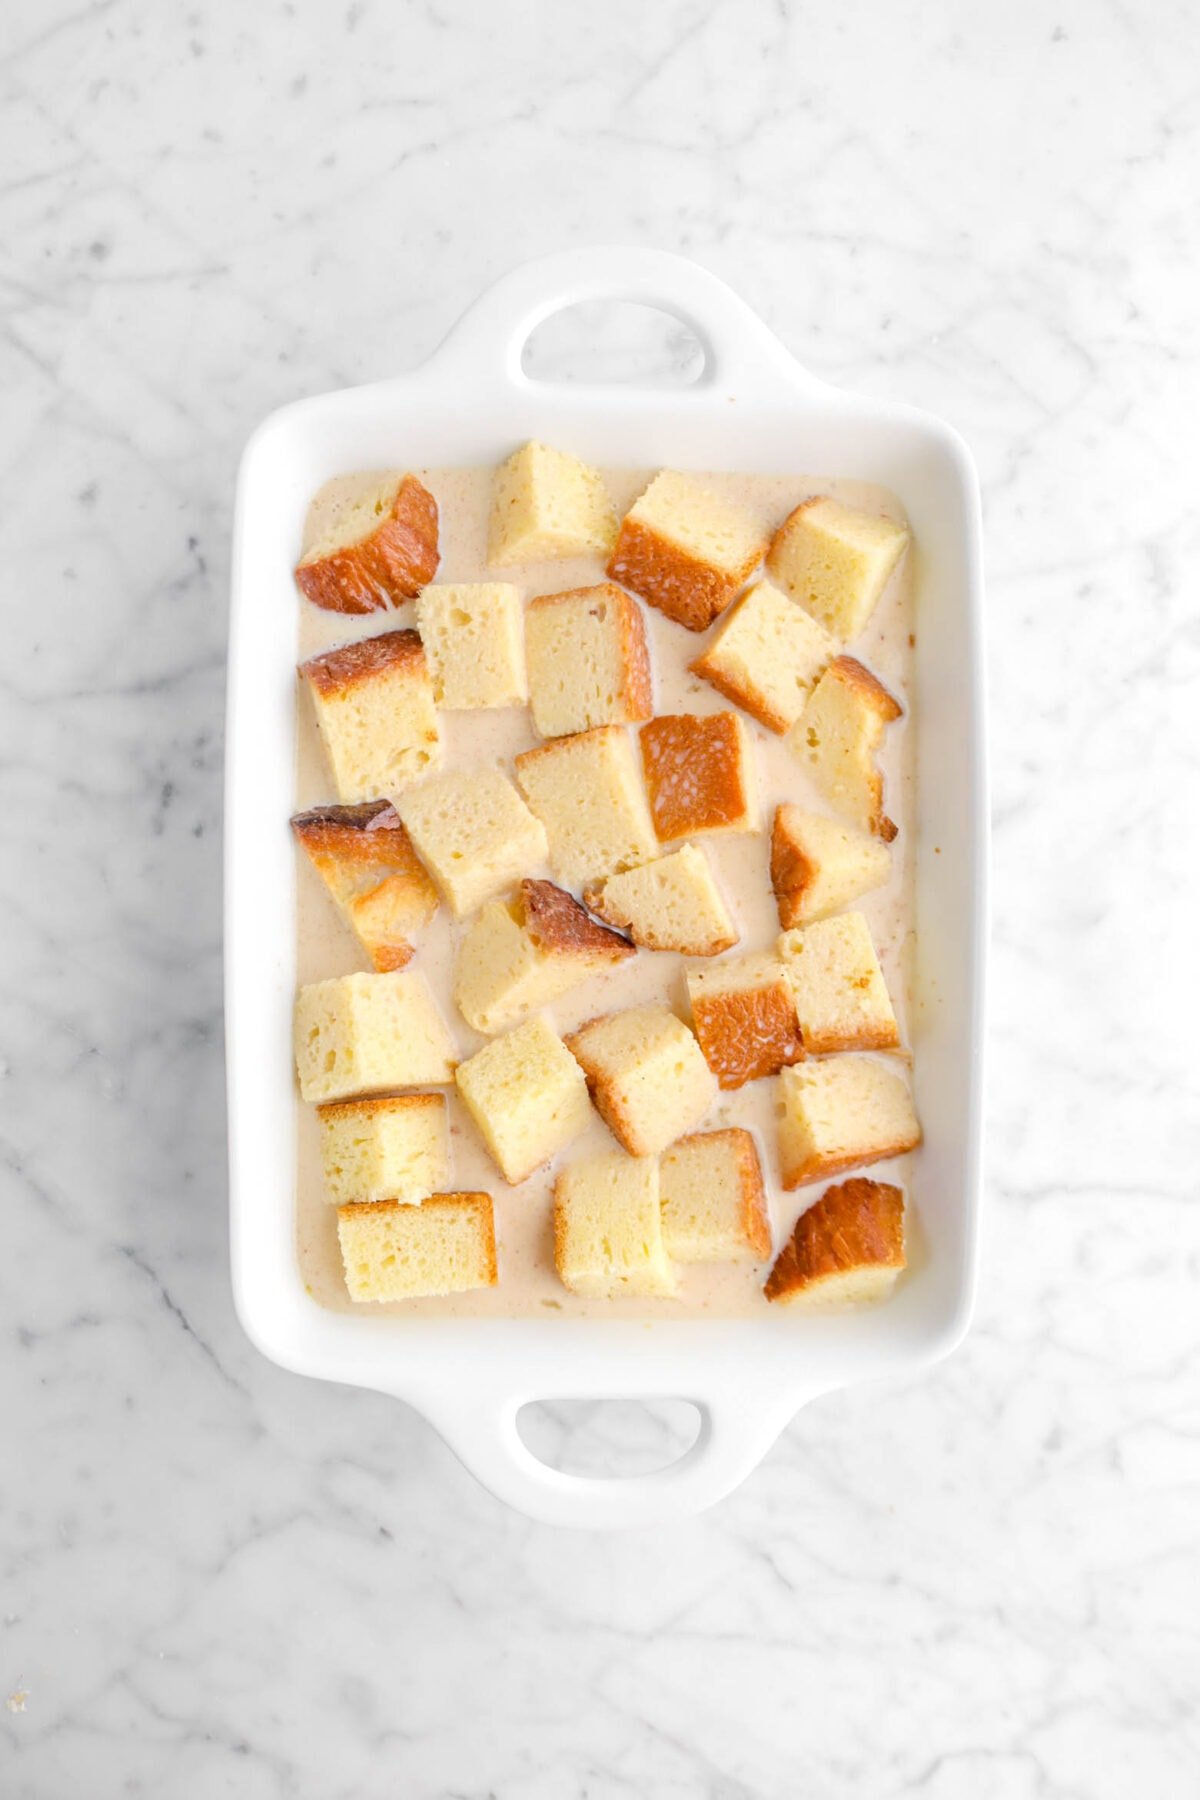 custard poured over cubed bread